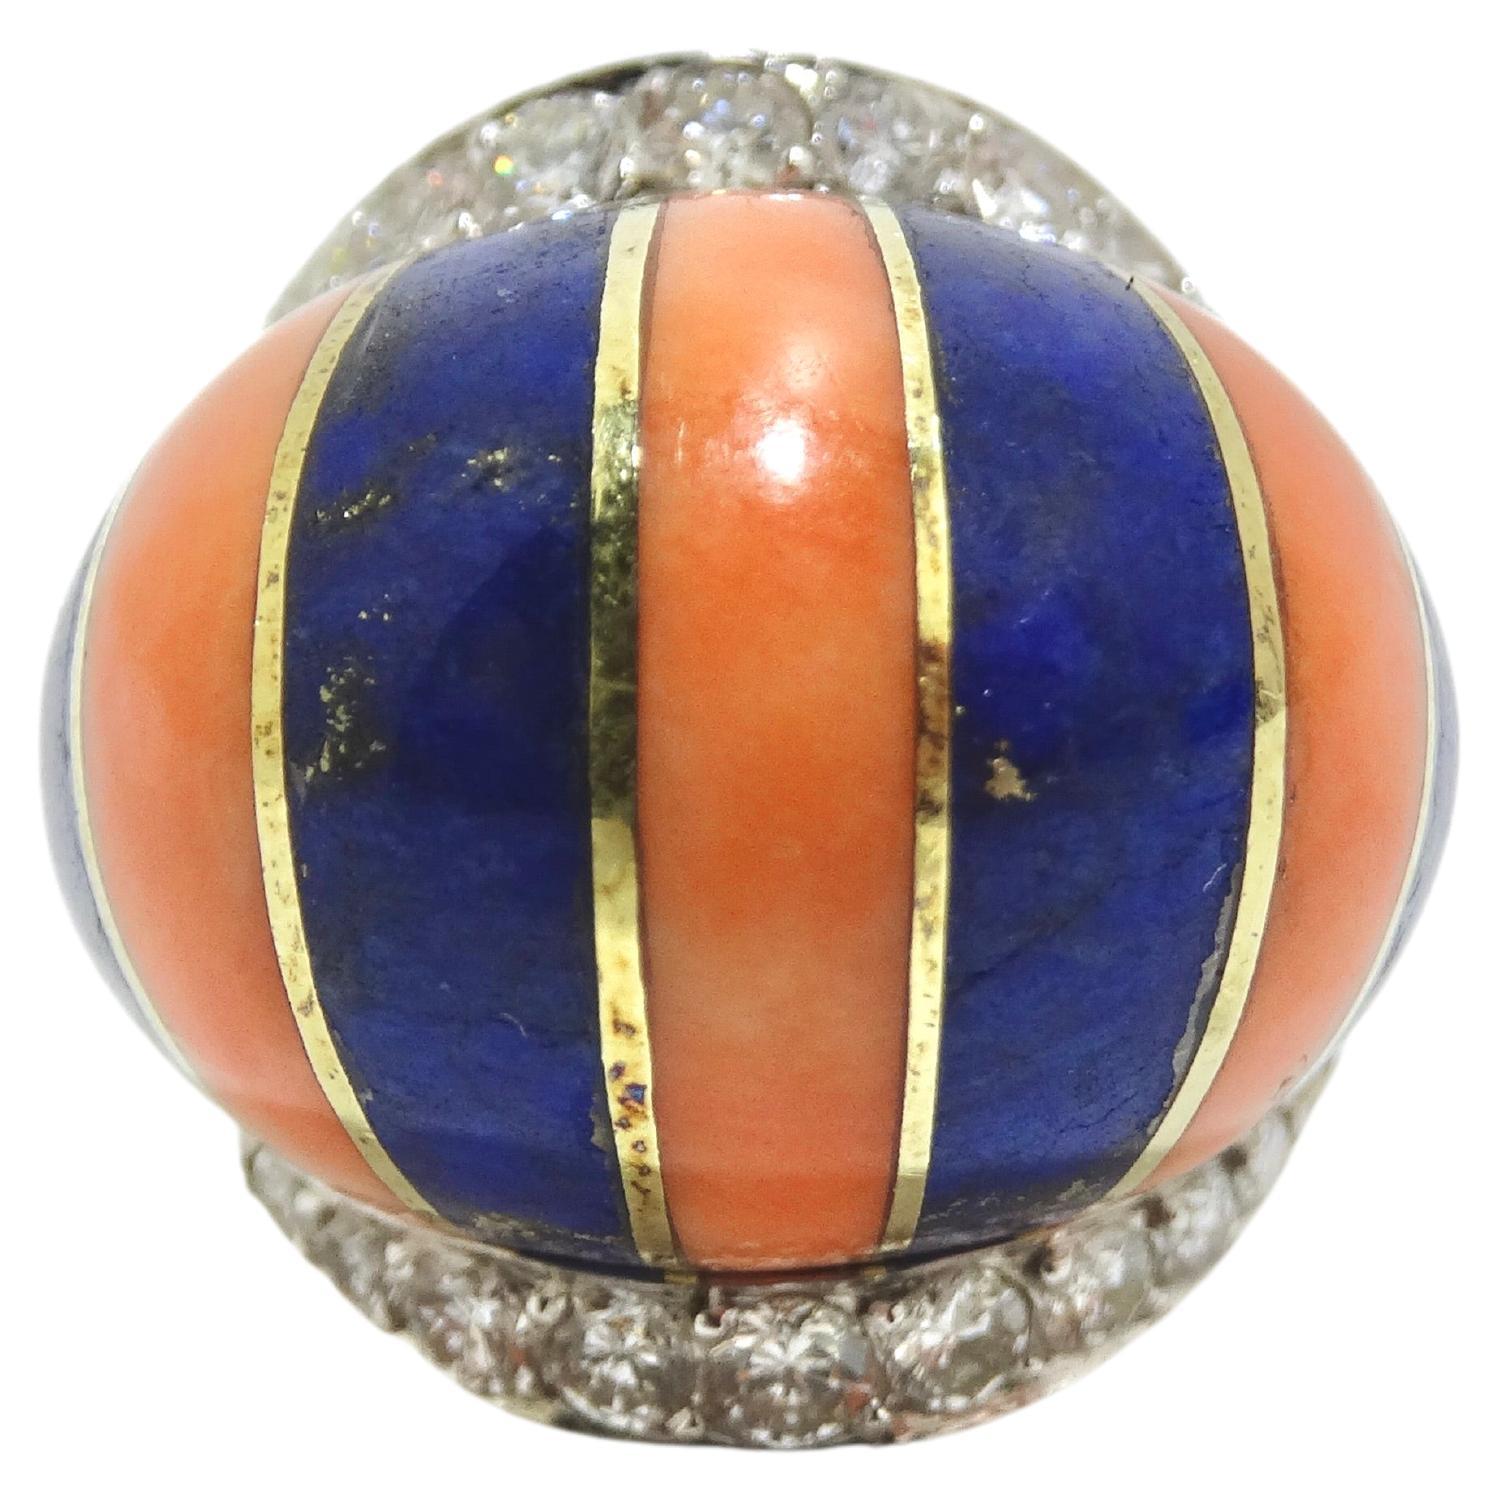 Coral And Lapis Striped Diamond Cocktail Ring